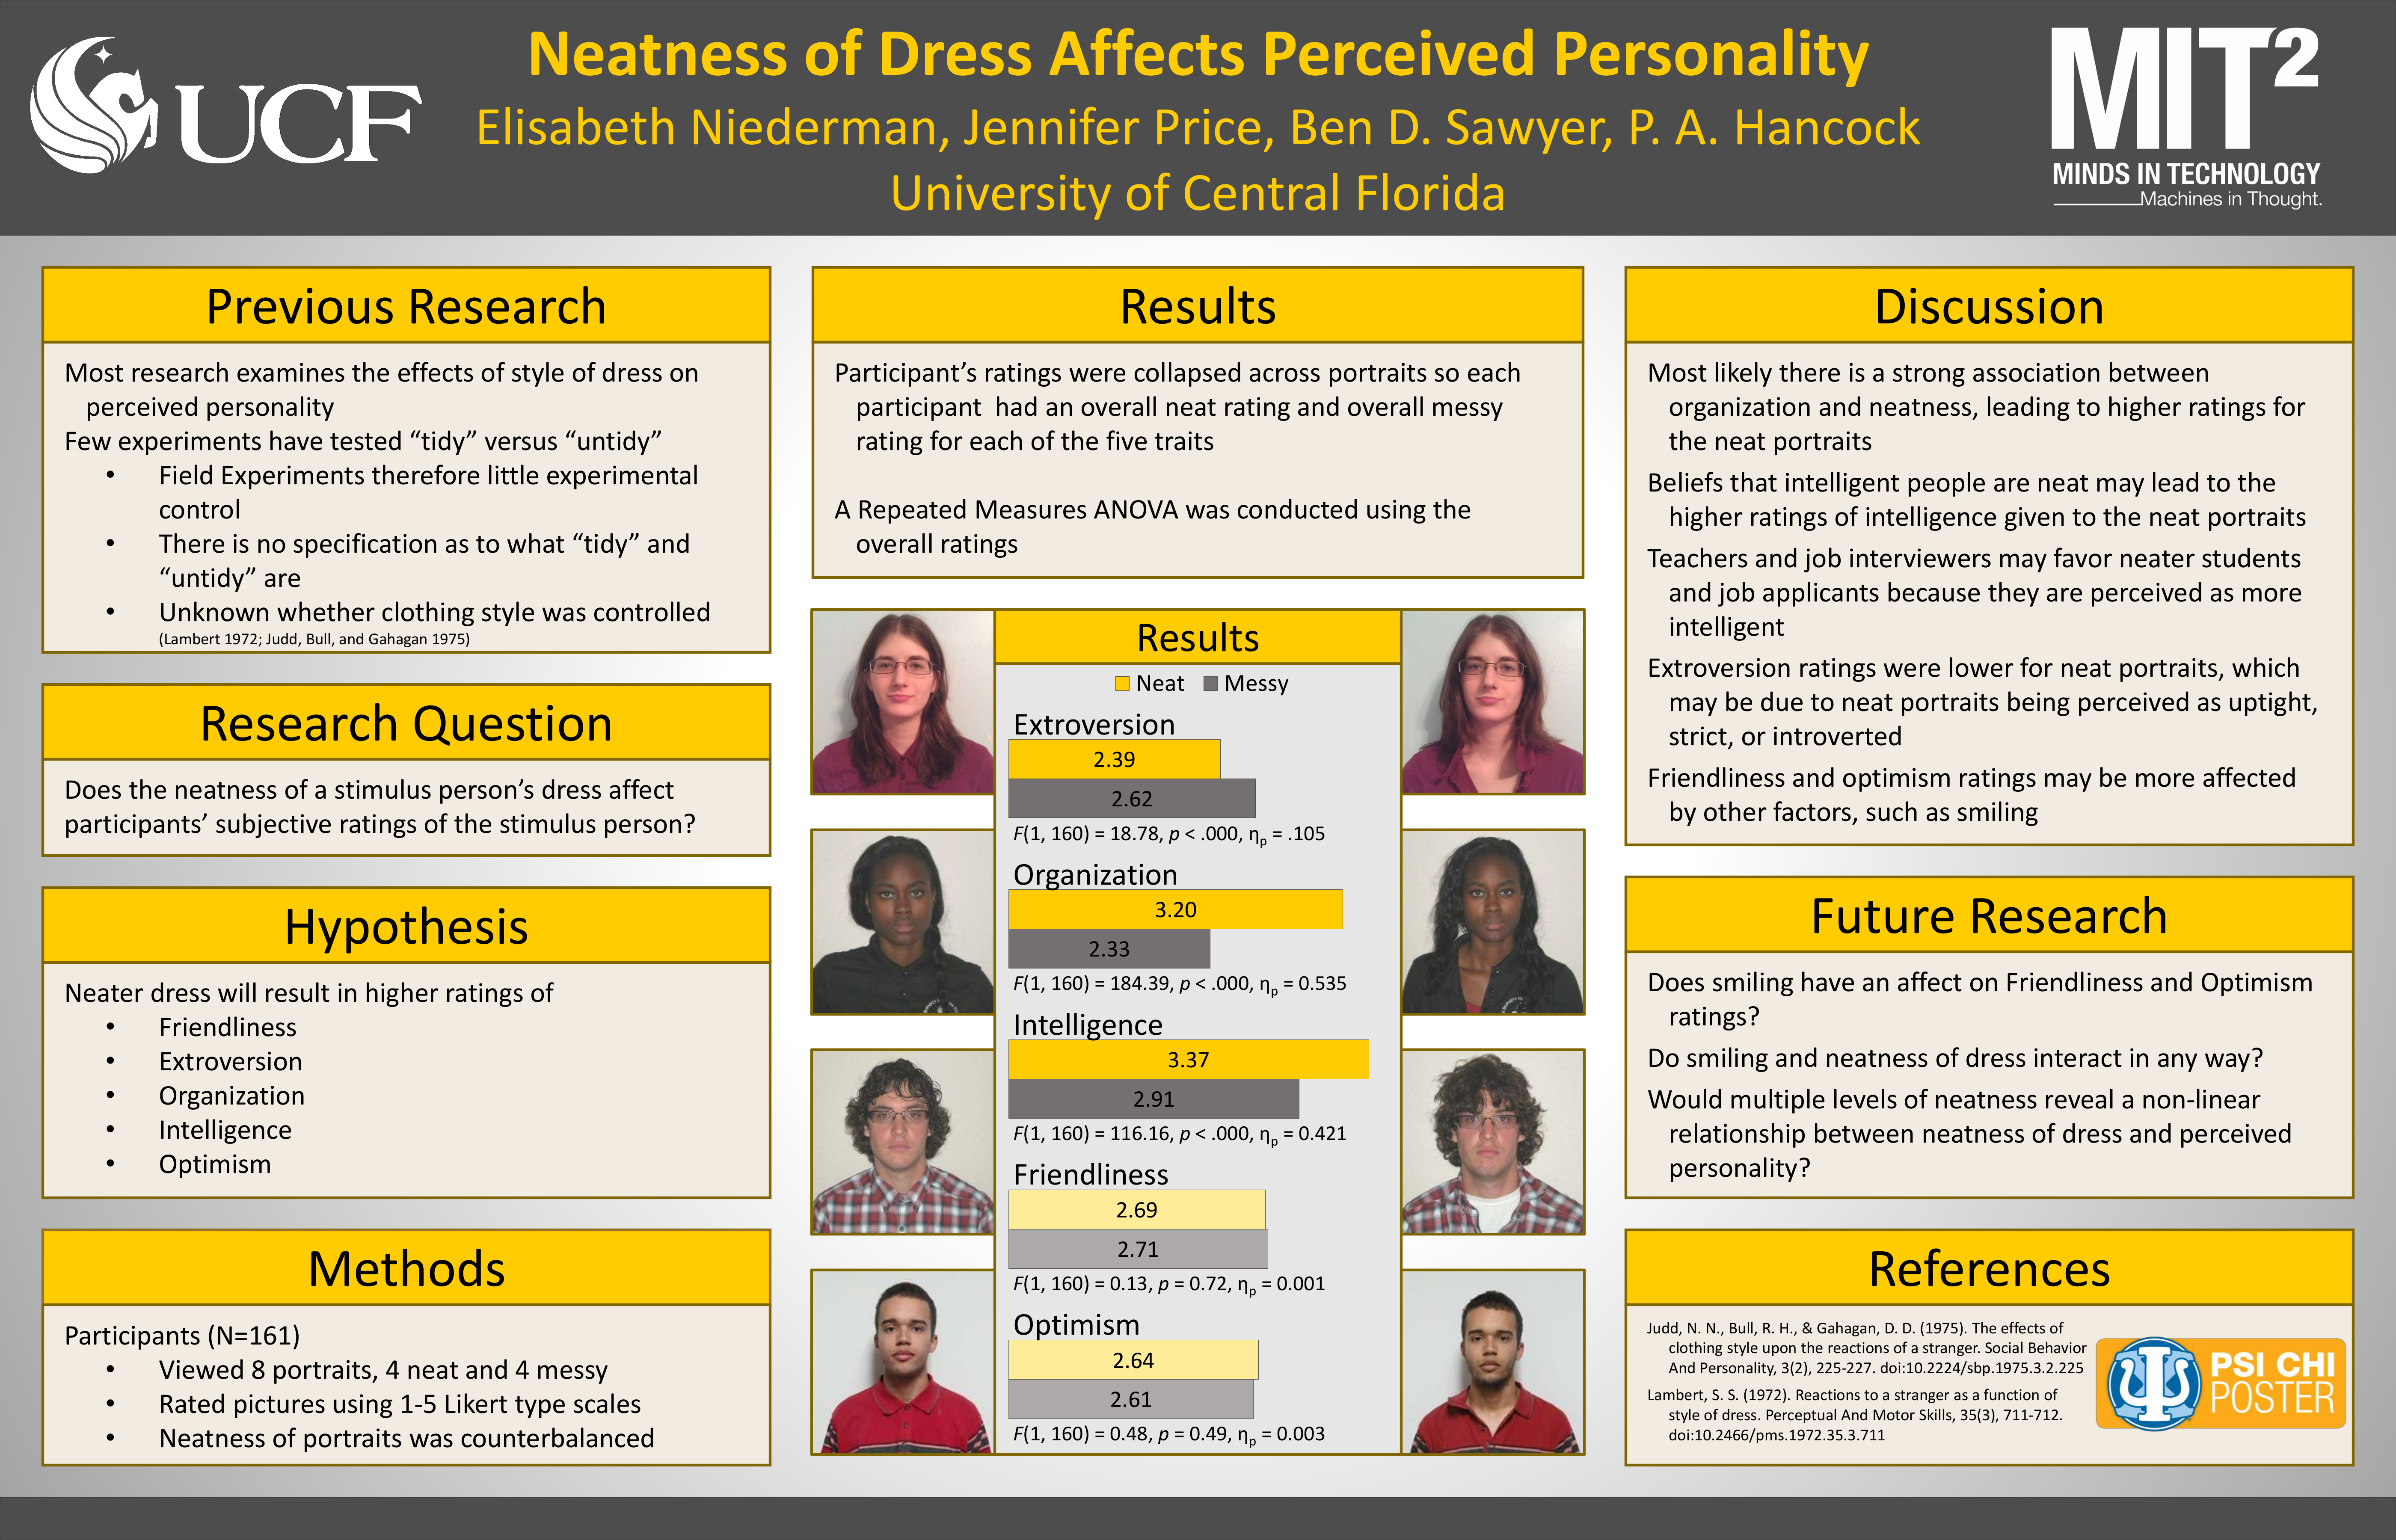 Niederman, E., Price, J., Sawyer, B. D., & Hancock, P. A. (2013, May). Neatness of Dress Affects Perceived Personality. Poster Presented at the 25th Annual Convention of the Association for Psychological Science, Washington, DC.